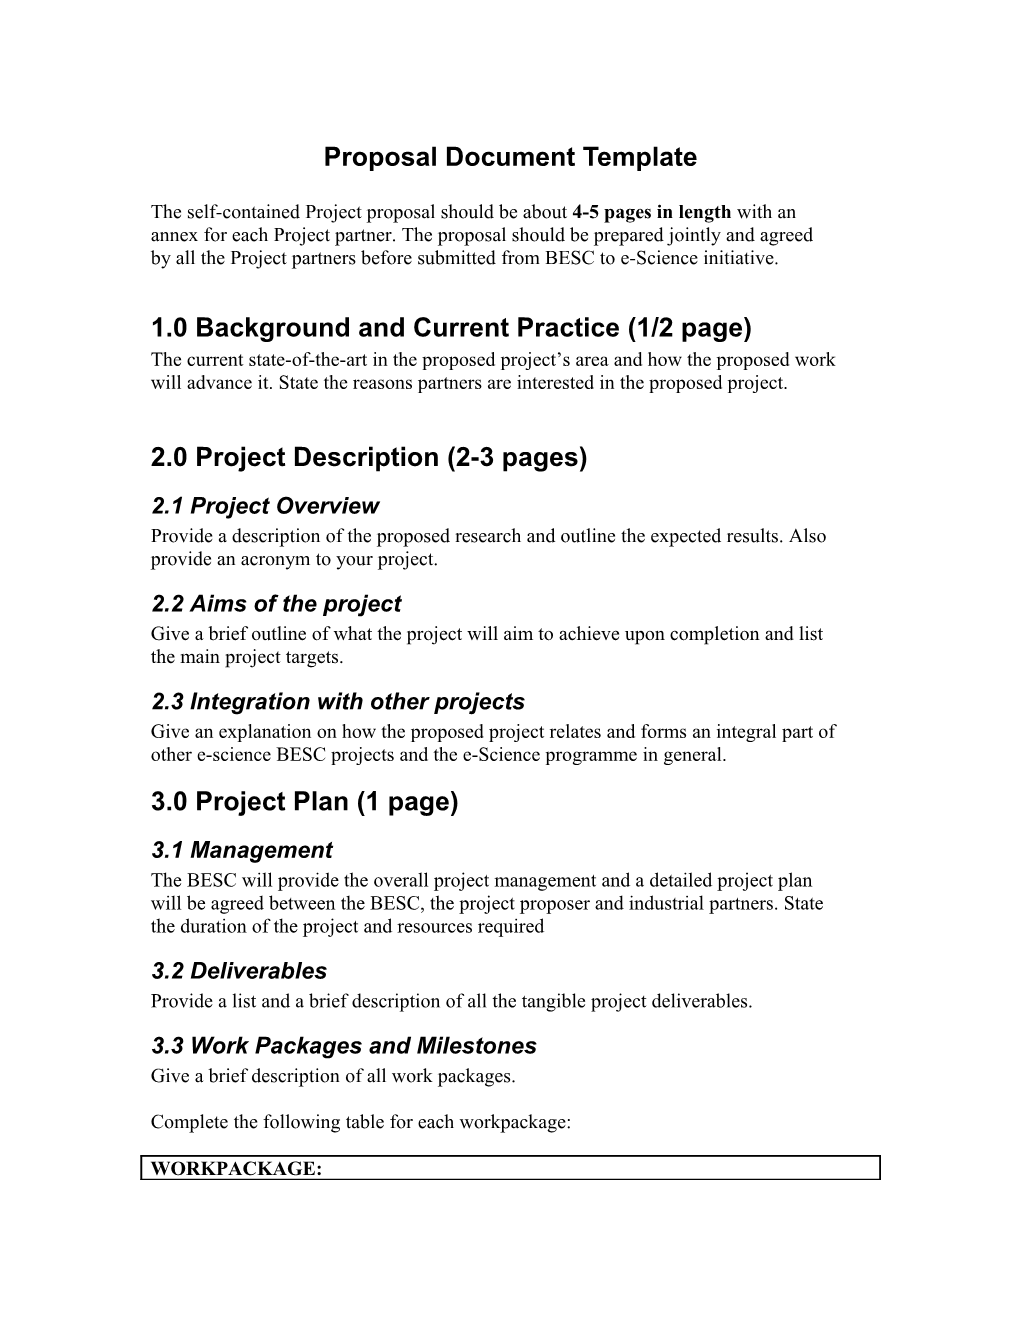 Proposal Document Template